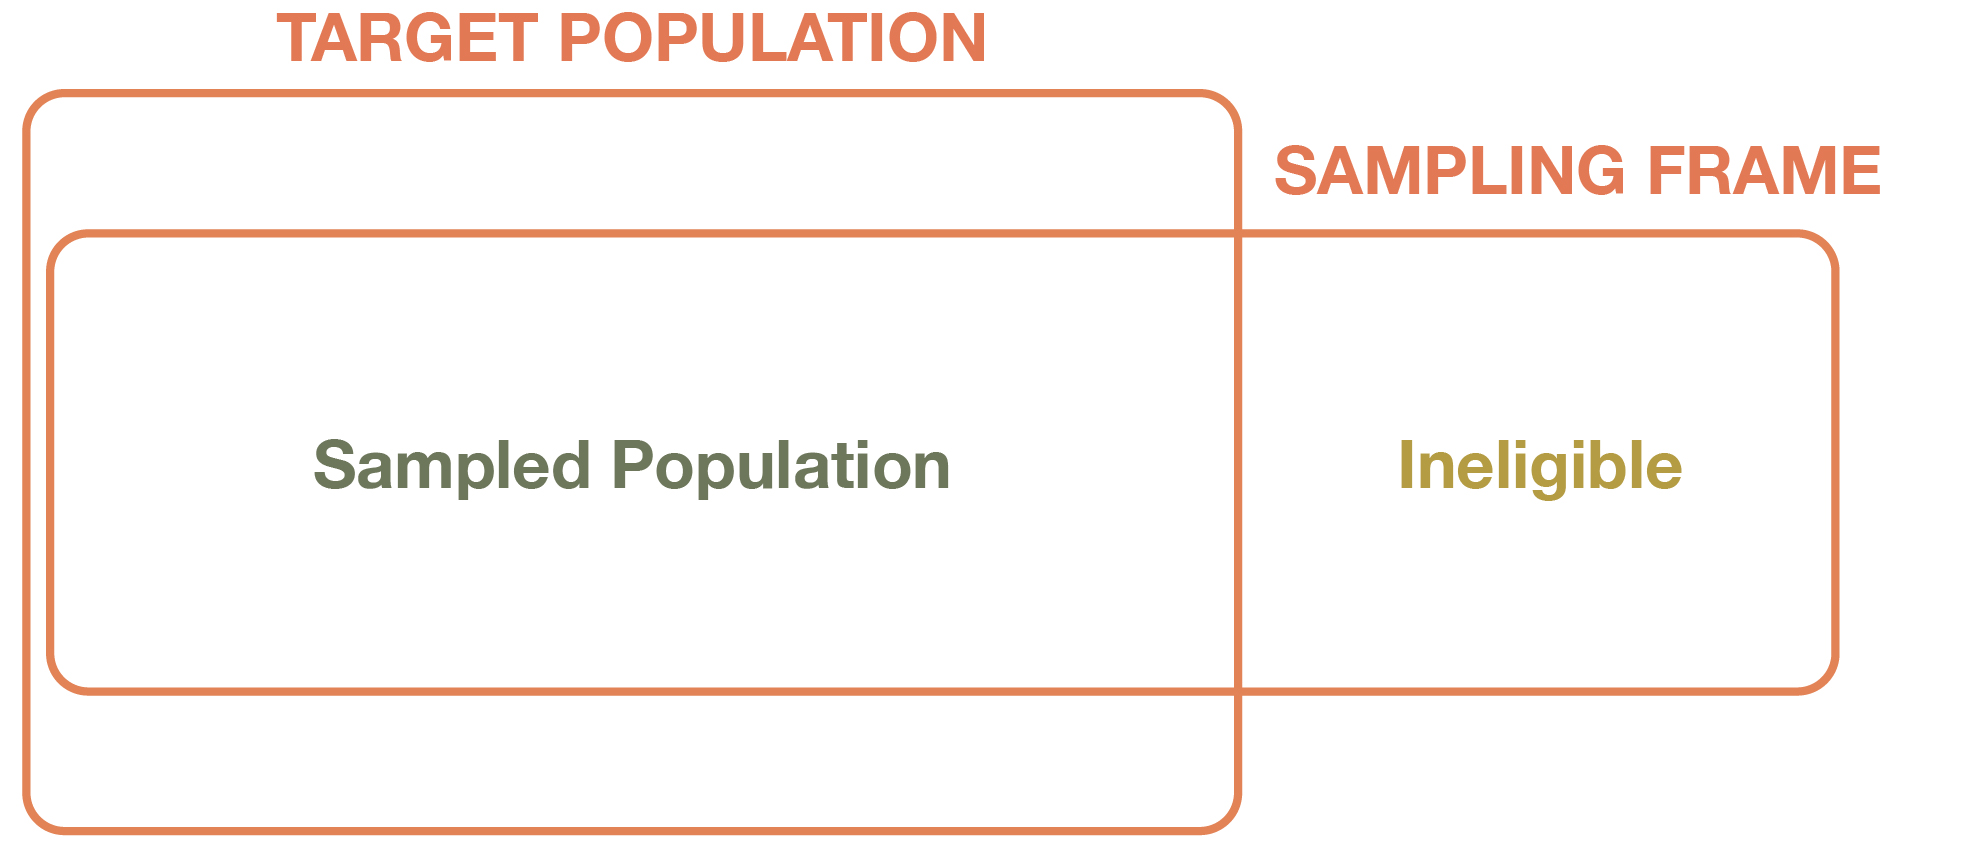 Diagram that features a box for the target population, within which is a box for the sampling frame—the part inside the population box is the sampled population, and the box outside is the ineligible cases that should be excluded from selection during sampling.